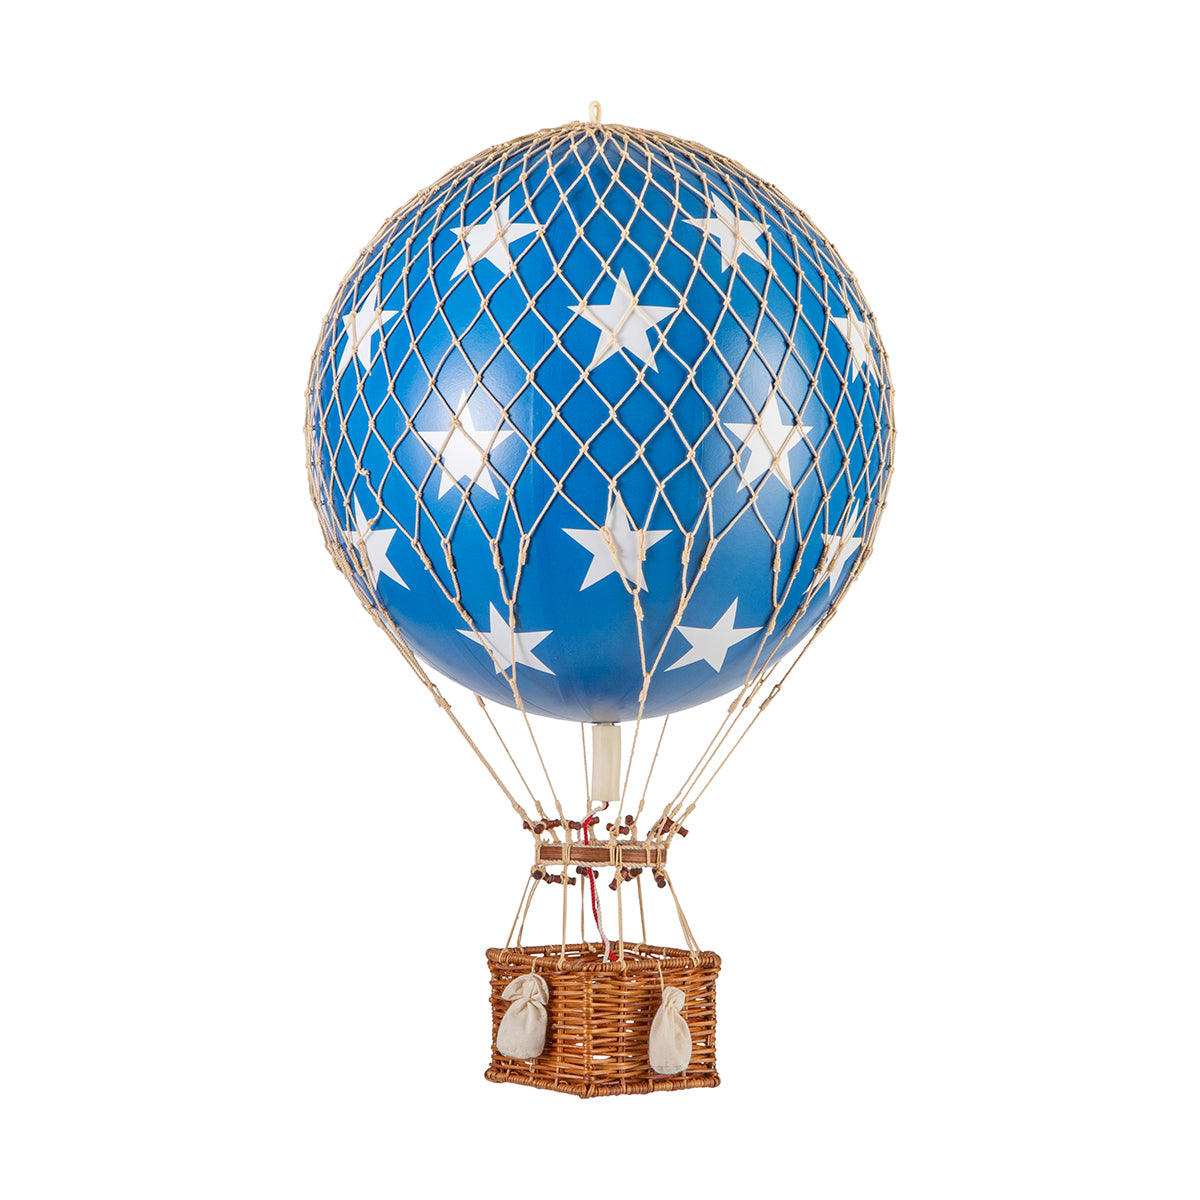 A Wonderen Stroopwafels hot air balloon with stars on it, taking you to new heights.